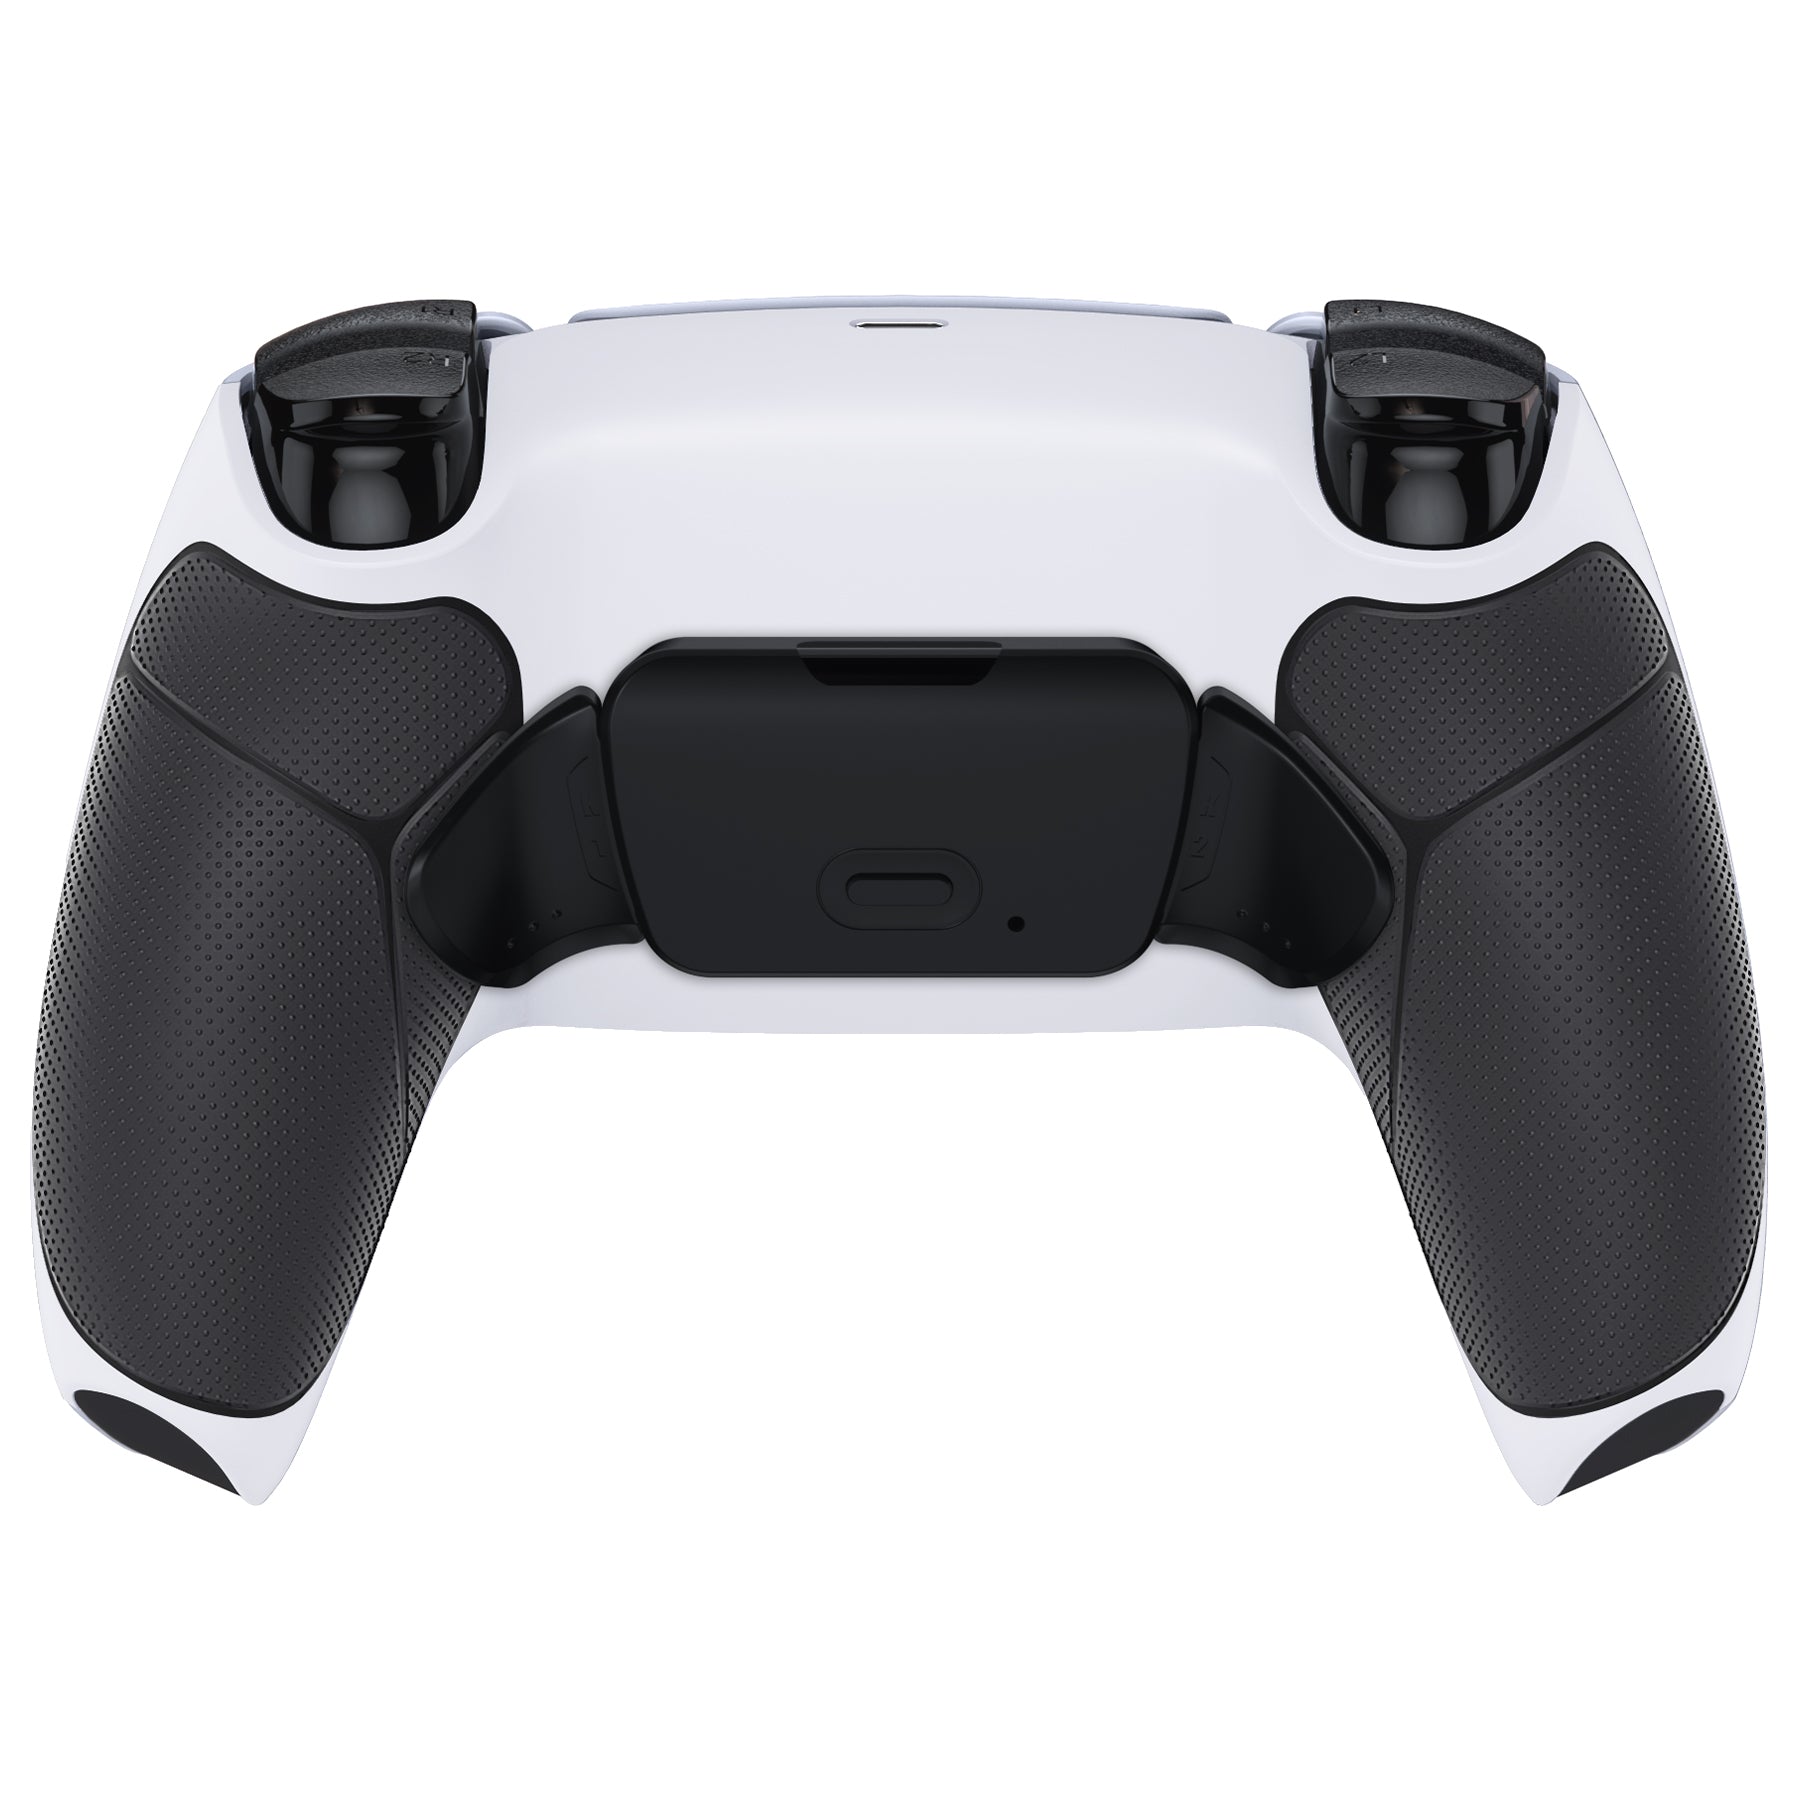 eXtremeRate Retail Rubberized Black Grip Remappable RISE Remap Kit for PS5 Controller BDM-030, Upgrade Board & Redesigned White Back Shell & Back Buttons for PS5 Controller - Controller NOT Included - XPFU6010G3